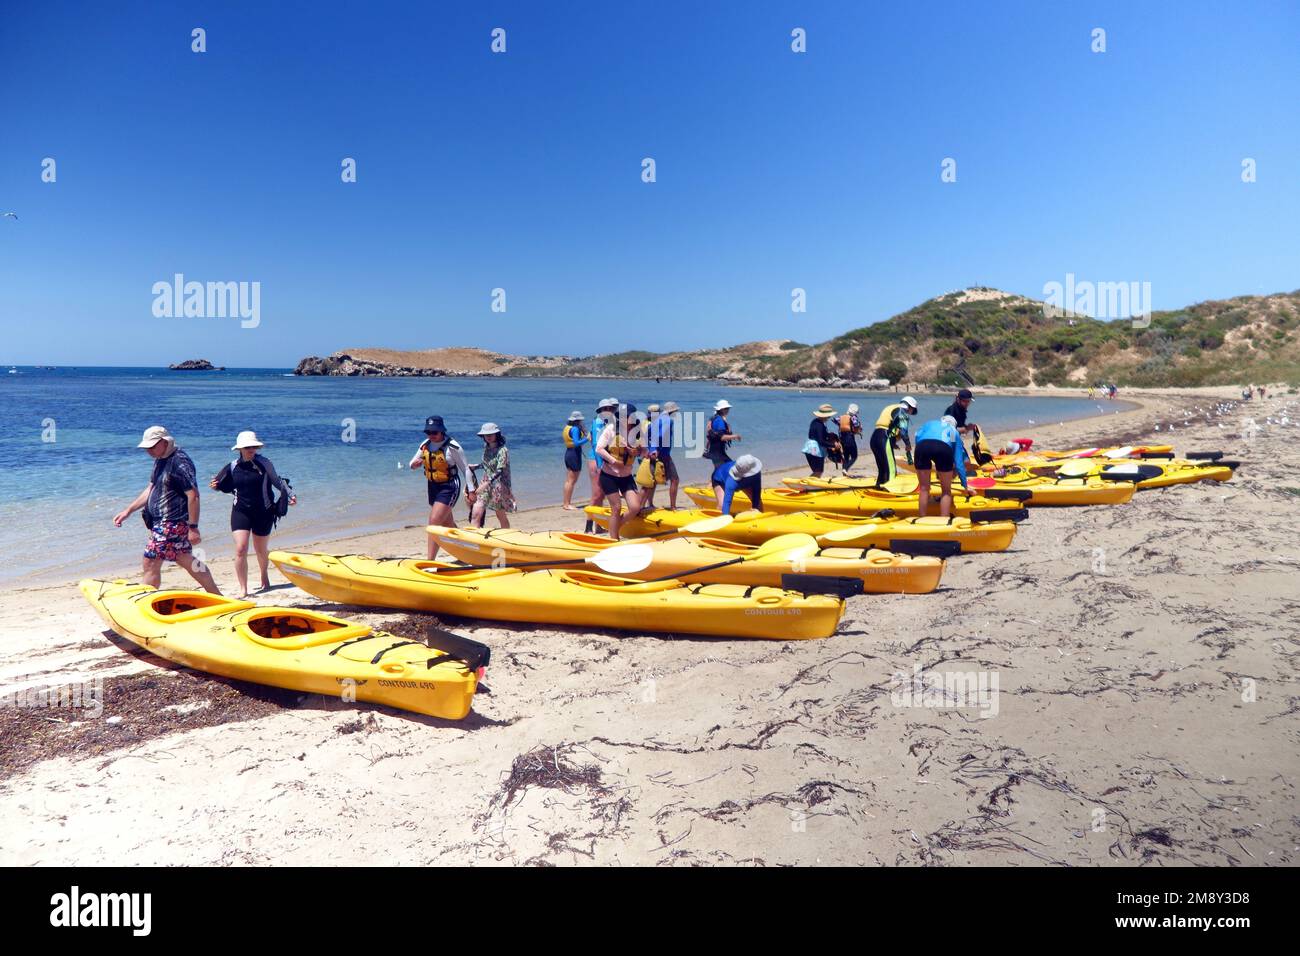 Kayakers gearing up on the beach, Penguin Island, Shoalwater Islands Marine Park, near Perth, Western Australia. No MR or PR Stock Photo